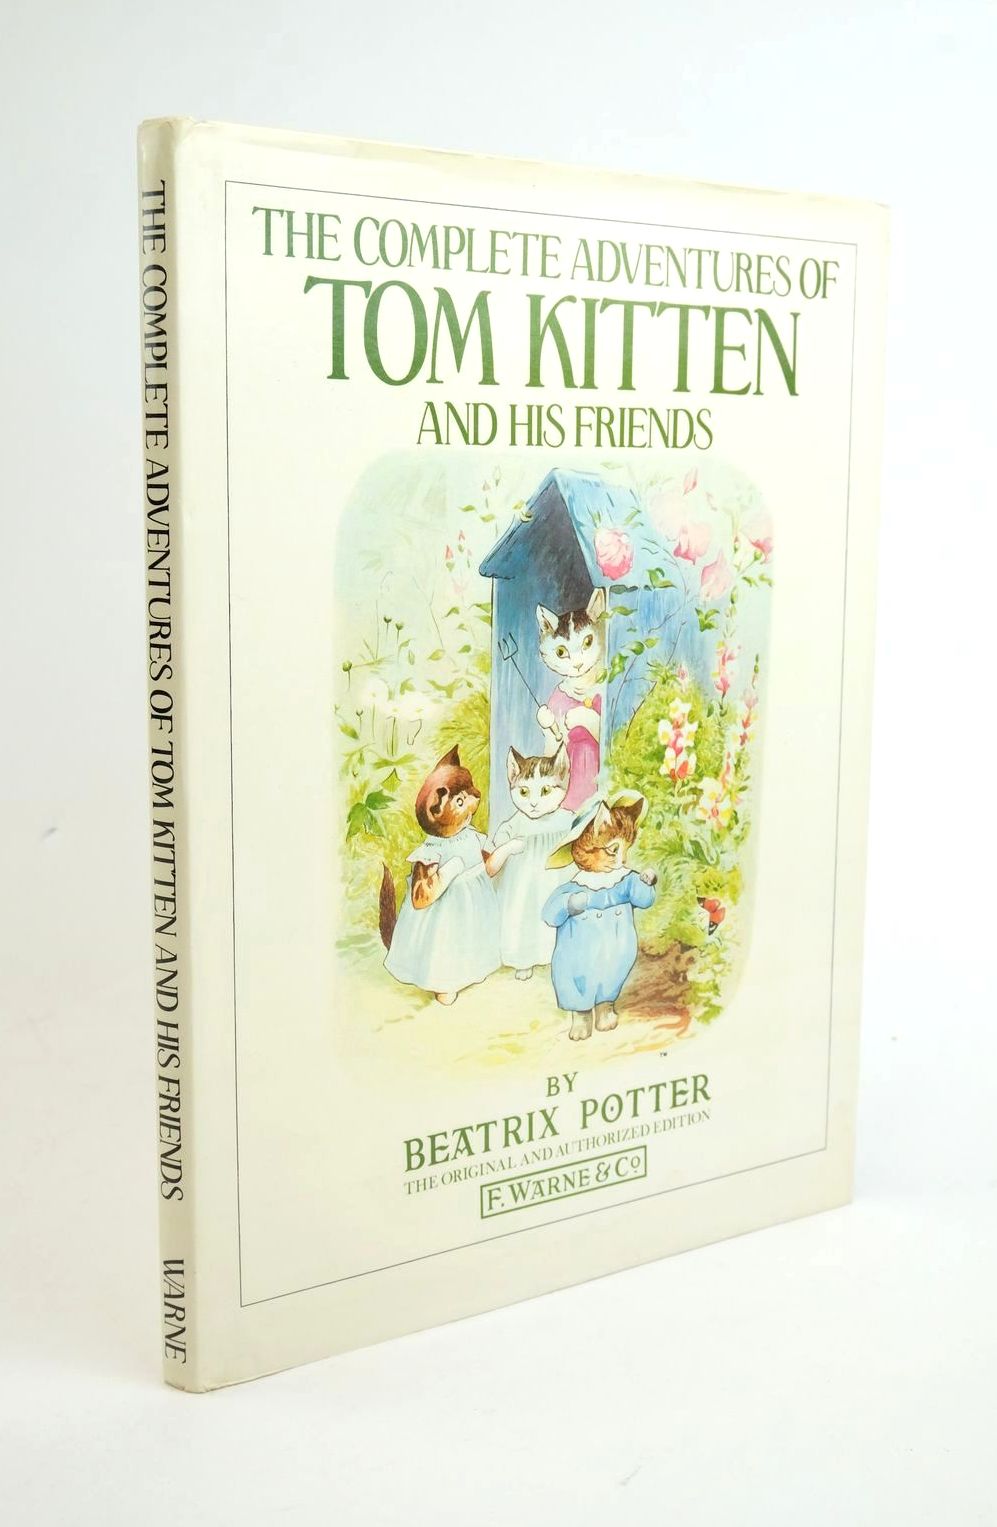 Photo of THE COMPLETE ADVENTURES OF TOM KITTEN AND HIS FRIENDS written by Potter, Beatrix illustrated by Potter, Beatrix published by Frederick Warne (STOCK CODE: 1322110)  for sale by Stella & Rose's Books